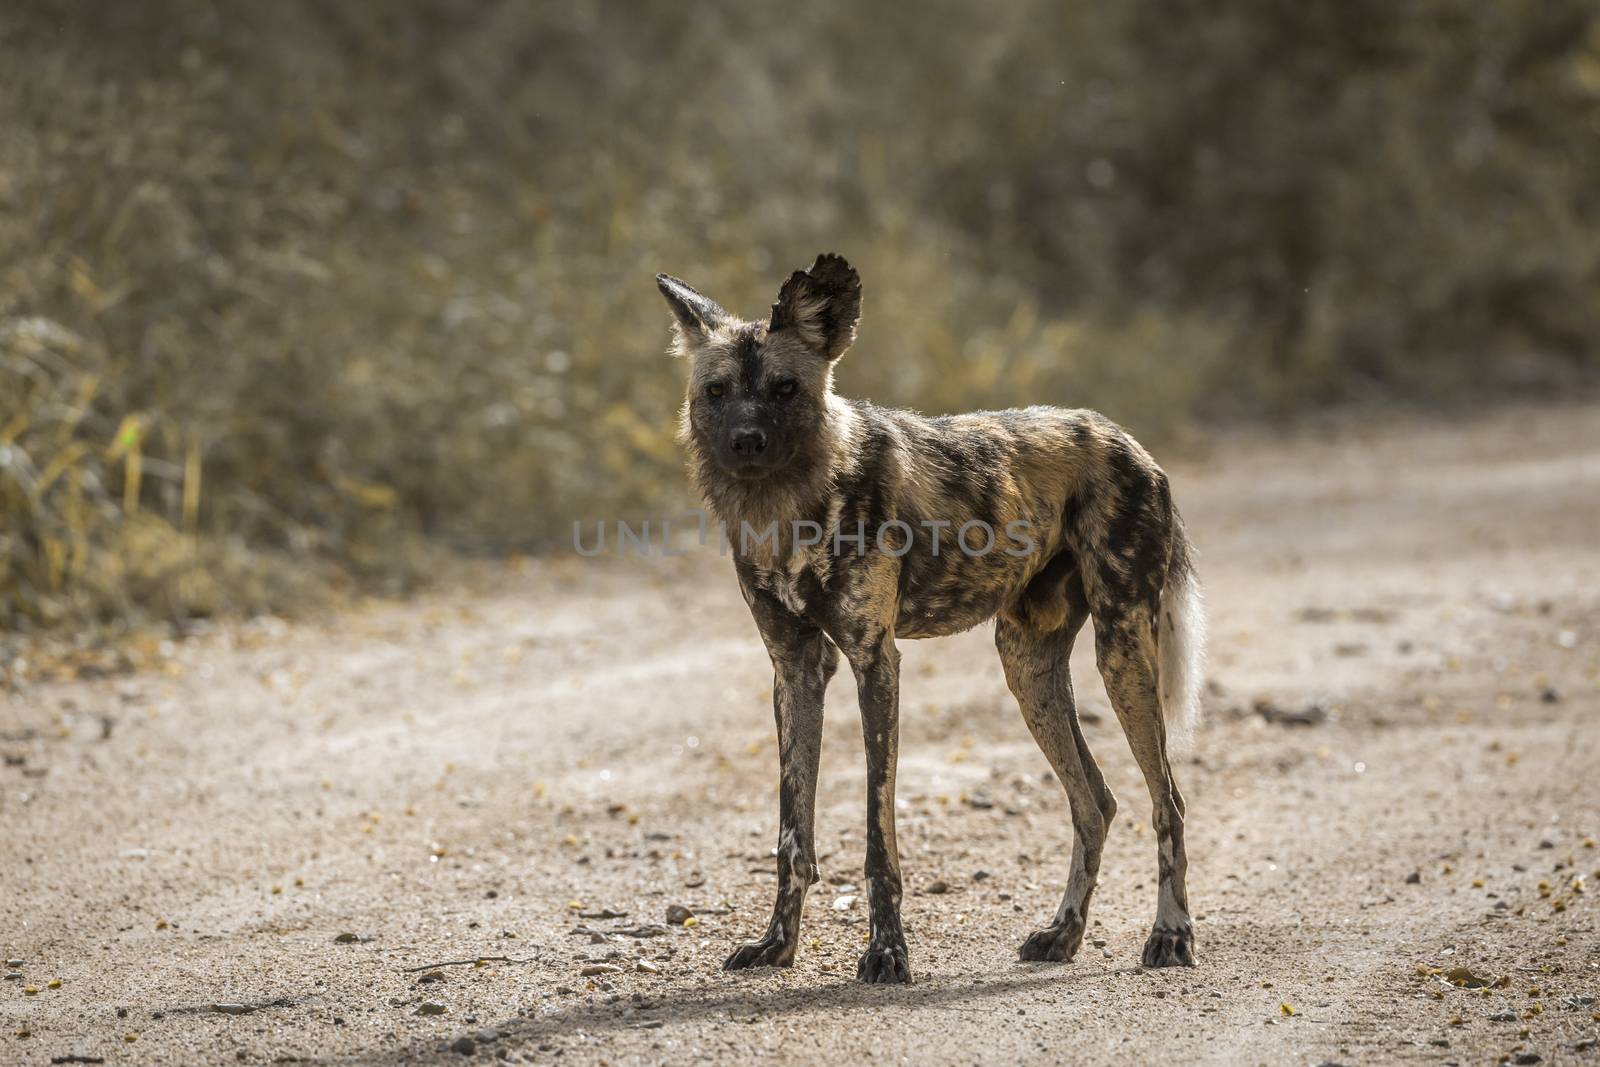 African wild dog standing on dirt road in Kruger National park, South Africa ; Specie Lycaon pictus family of Canidae